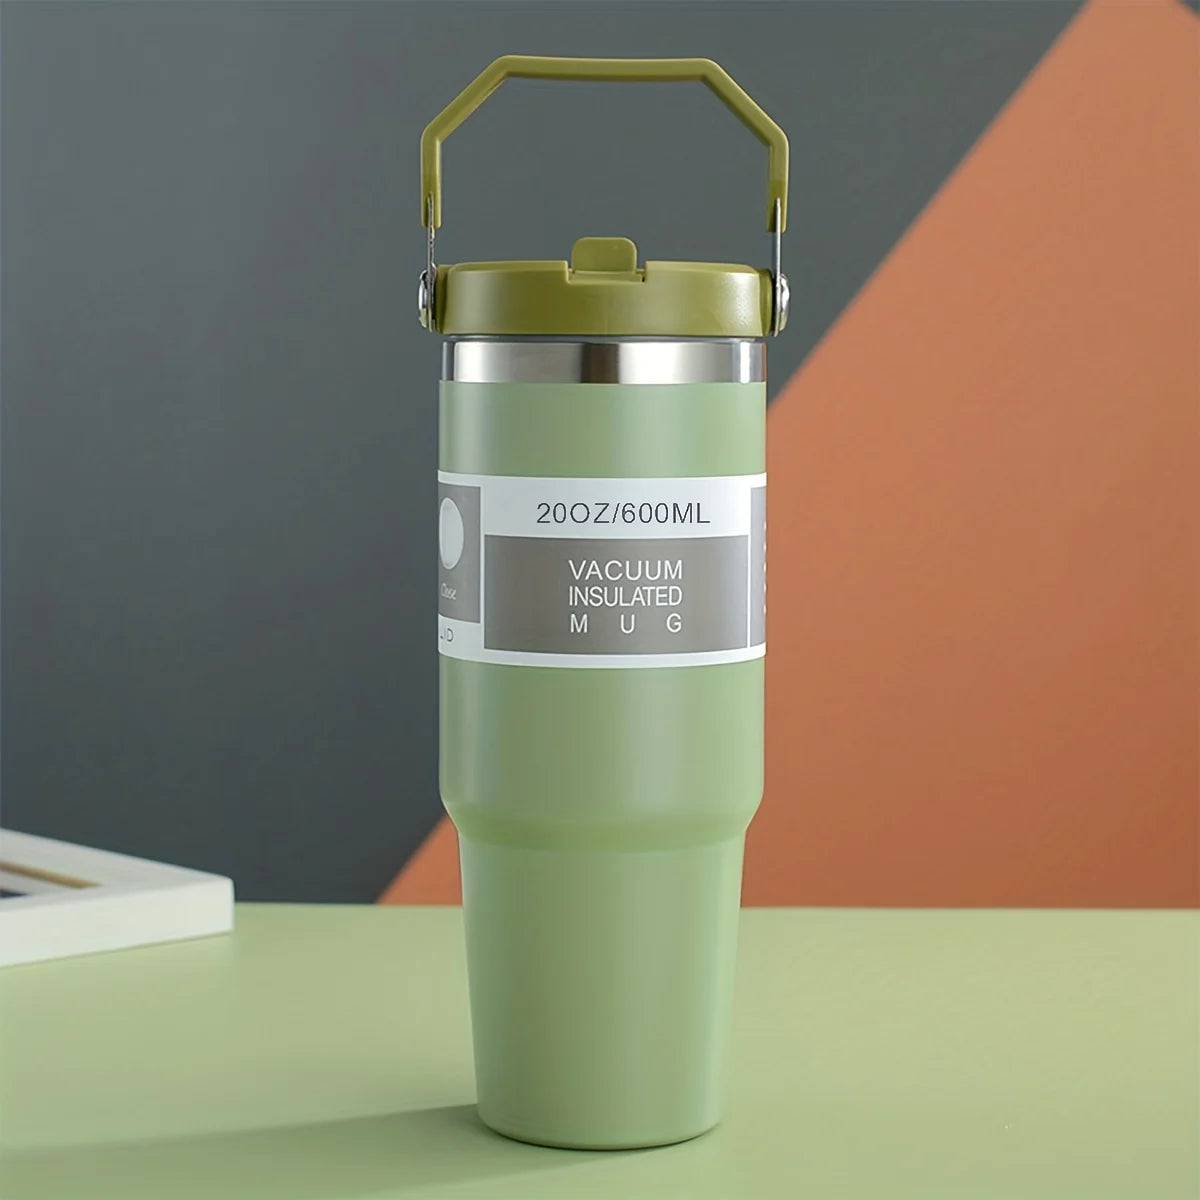 Vacuum insulated double-wall stainless steel cup with handle, portable water bottle in light green color